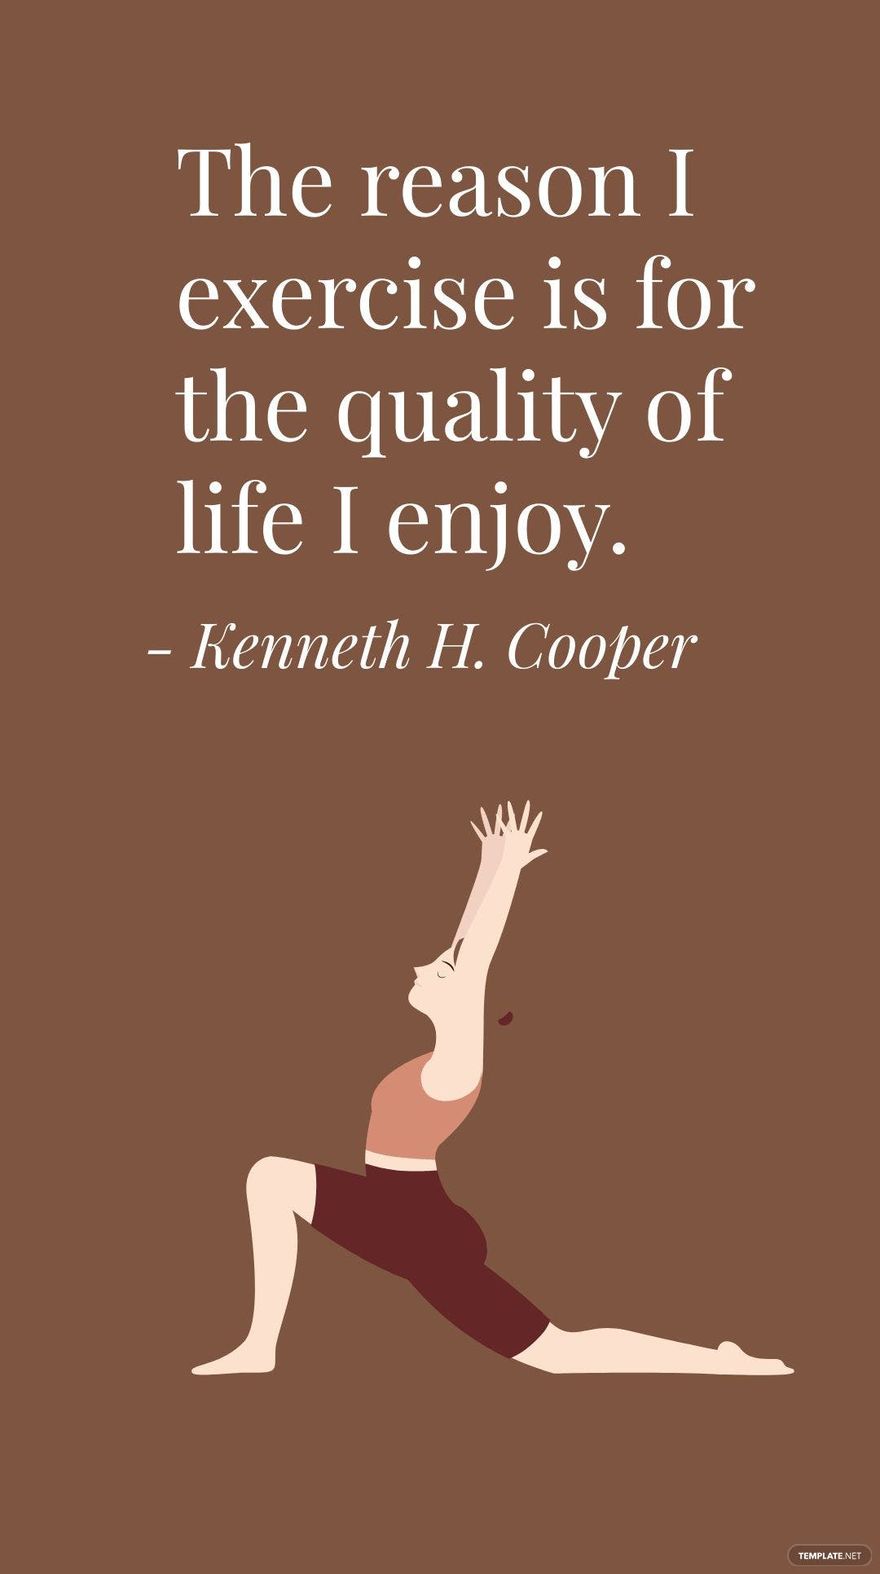 Free Kenneth H. Cooper - The reason I exercise is for the quality of life I enjoy. in JPG